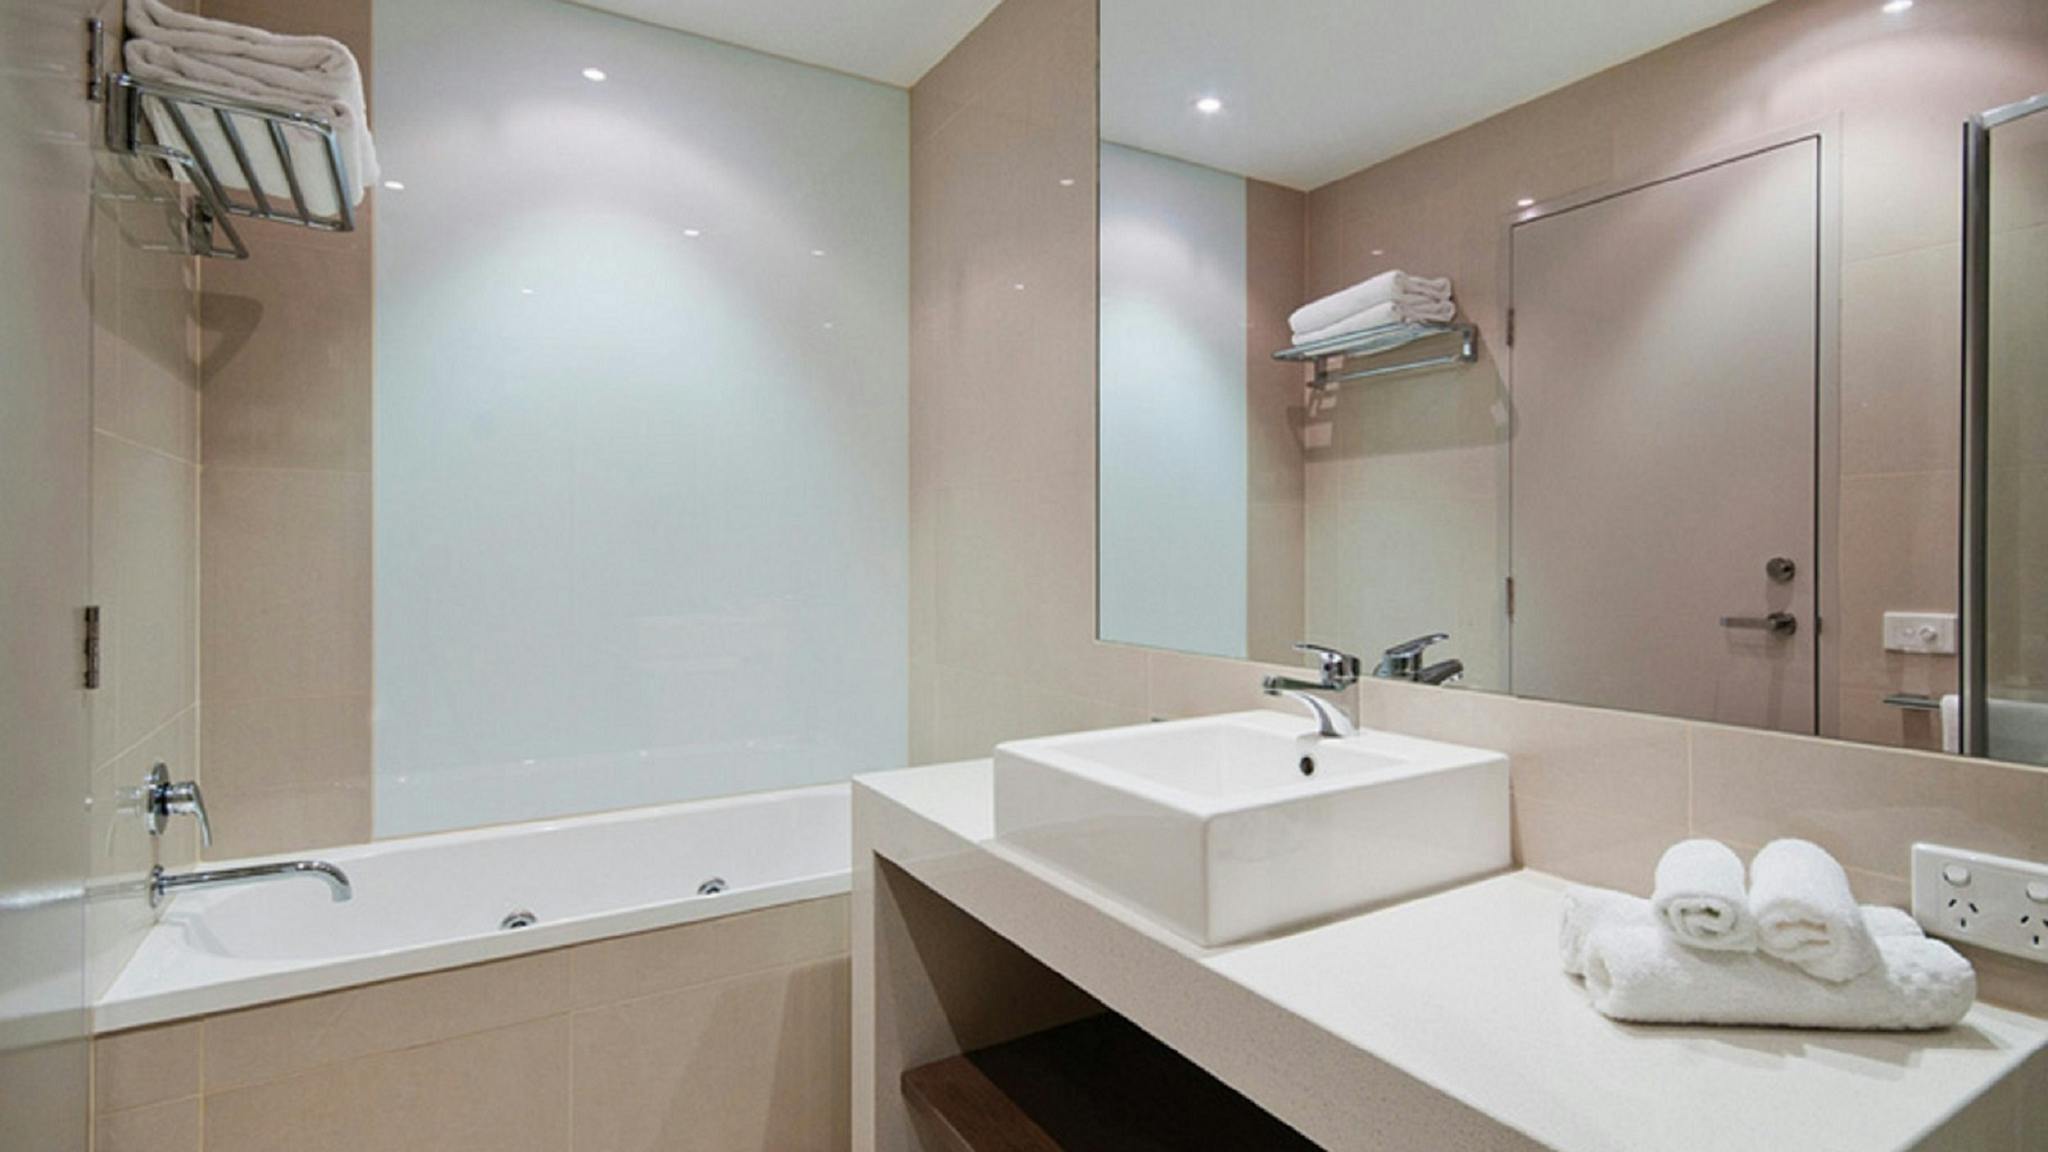 The Gateway's Apartments include bathroom with spa bath and separate toilet